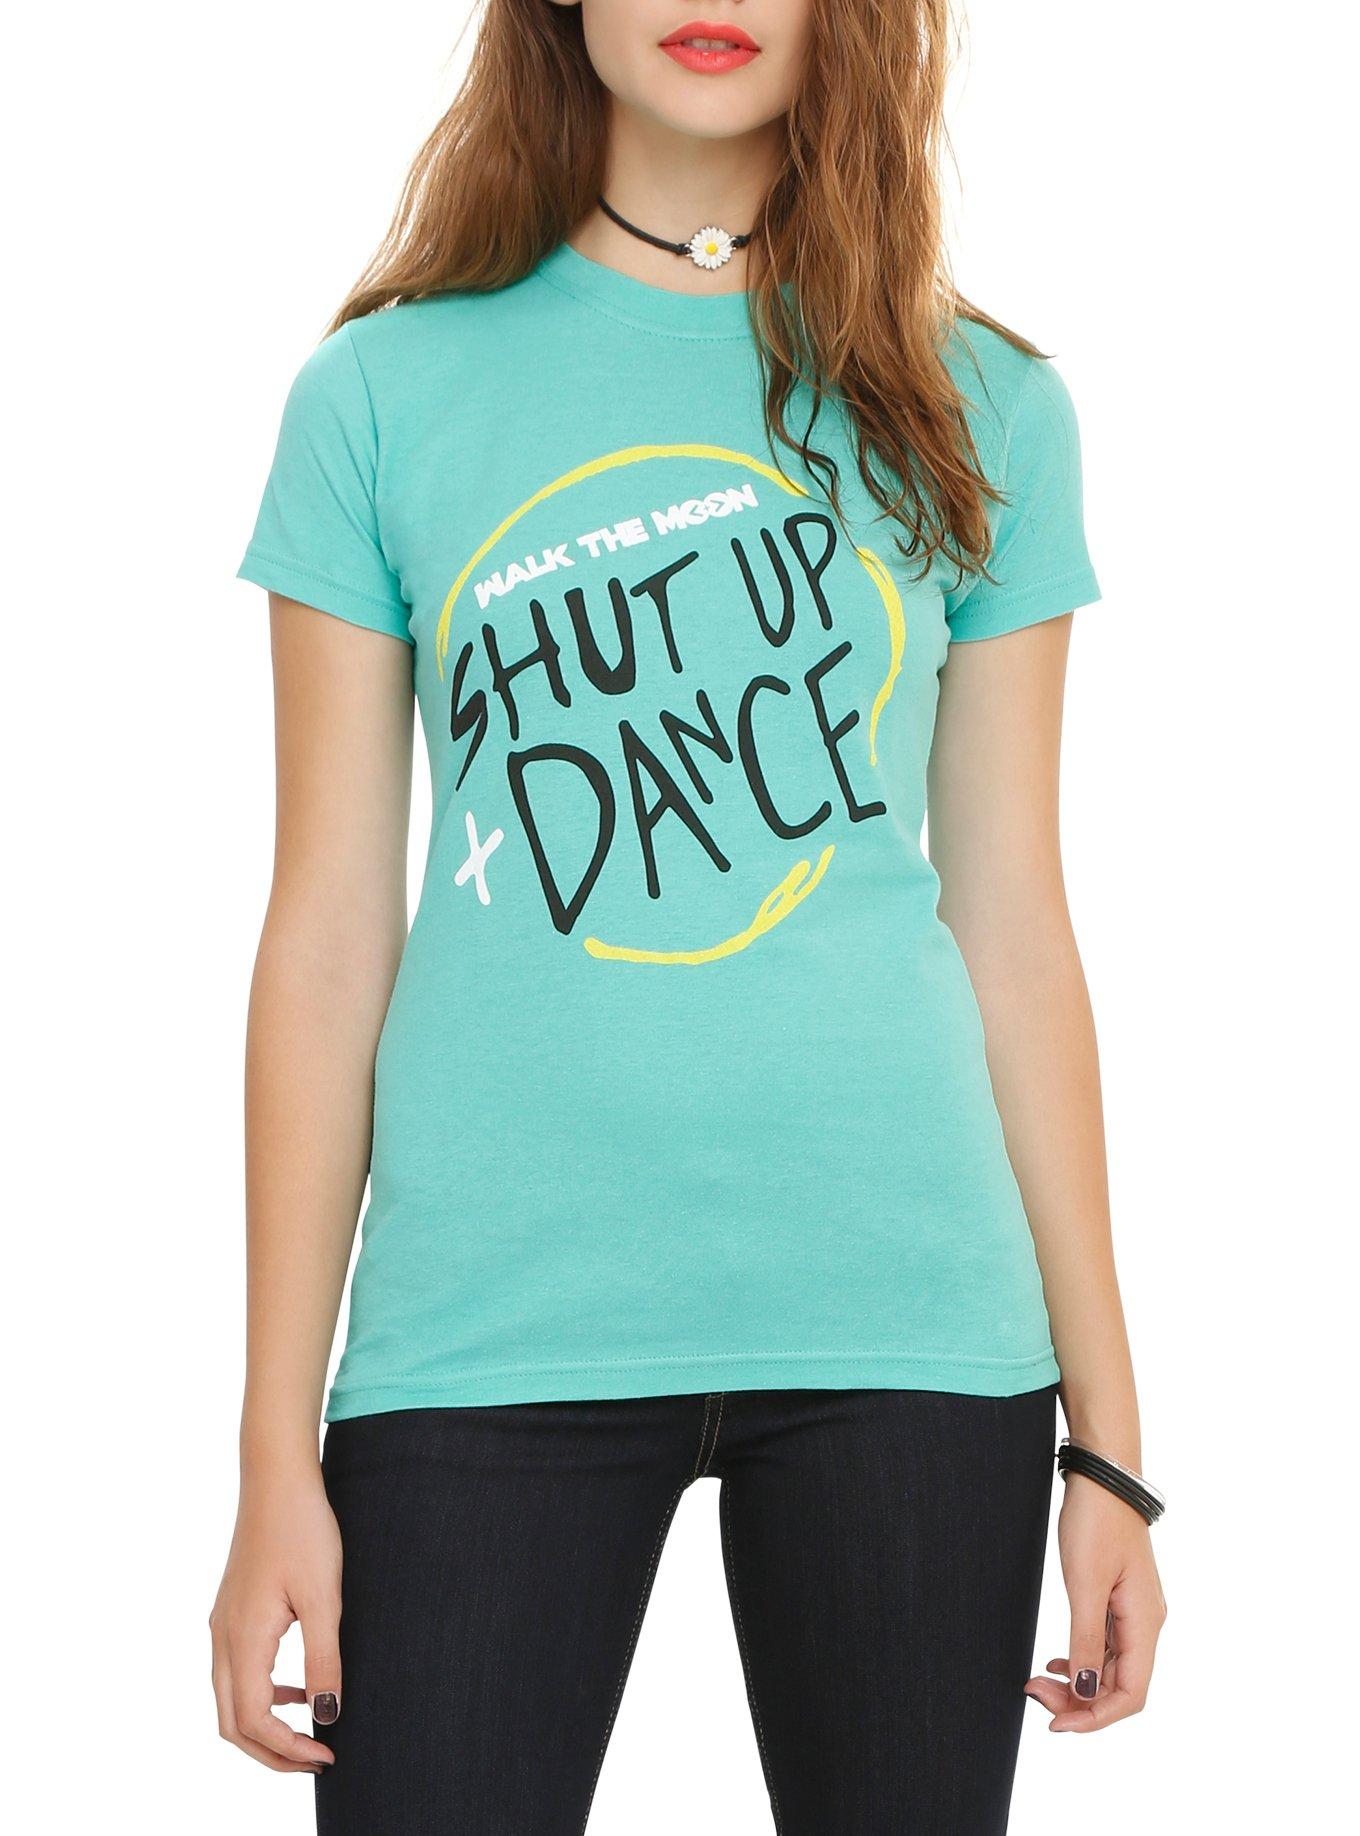 Walk The Moon Shut Up And Dance Girls T-Shirt, TURQUOISE, hi-res